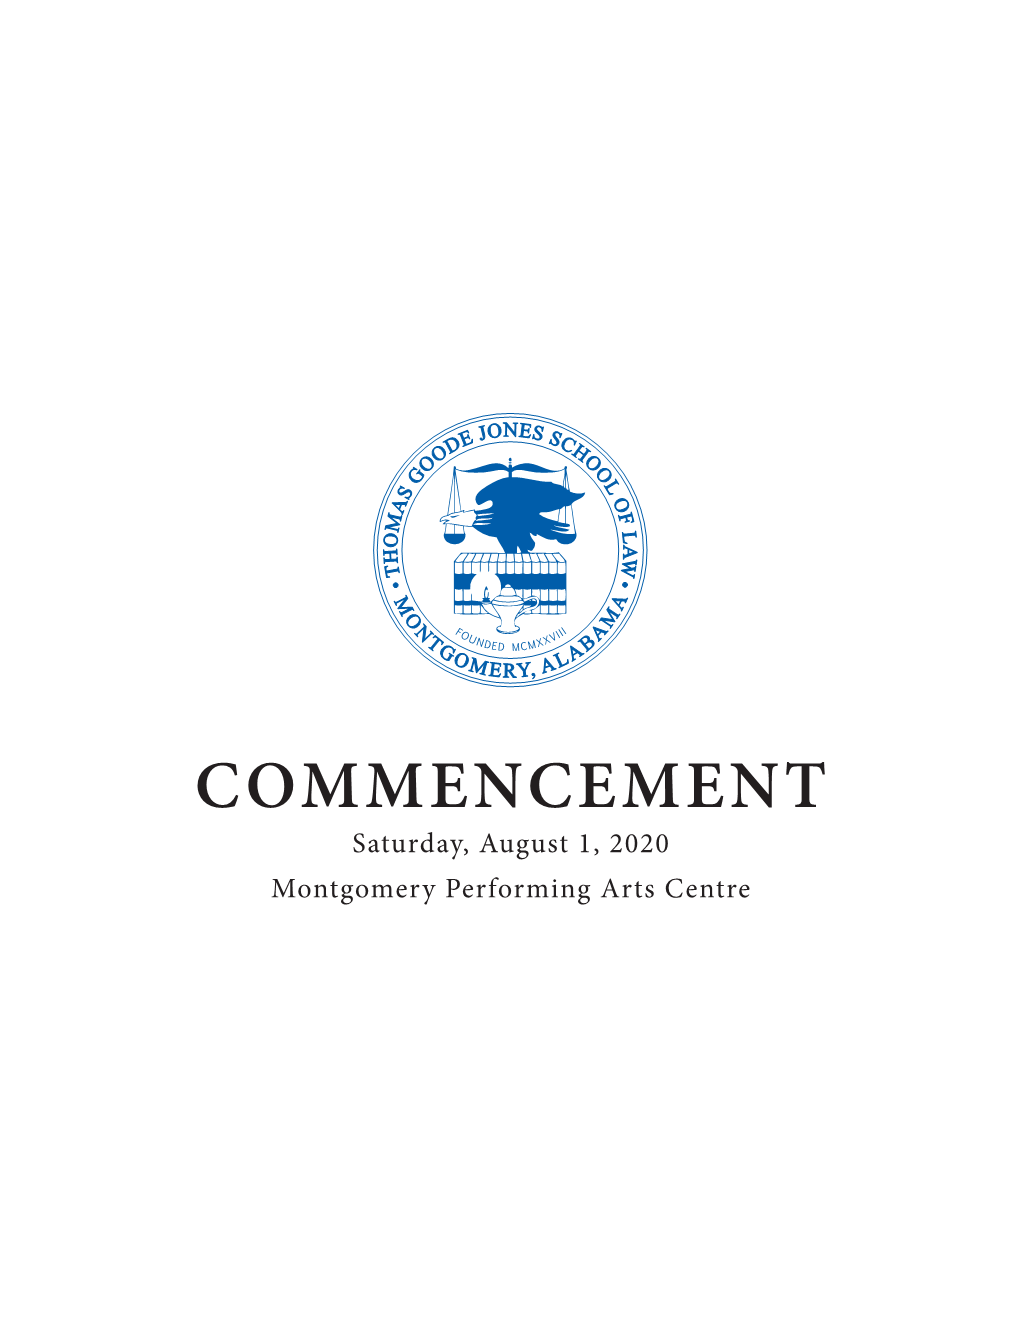 COMMENCEMENT Saturday, August 1, 2020 Montgomery Performing Arts Centre About Faulkner Law